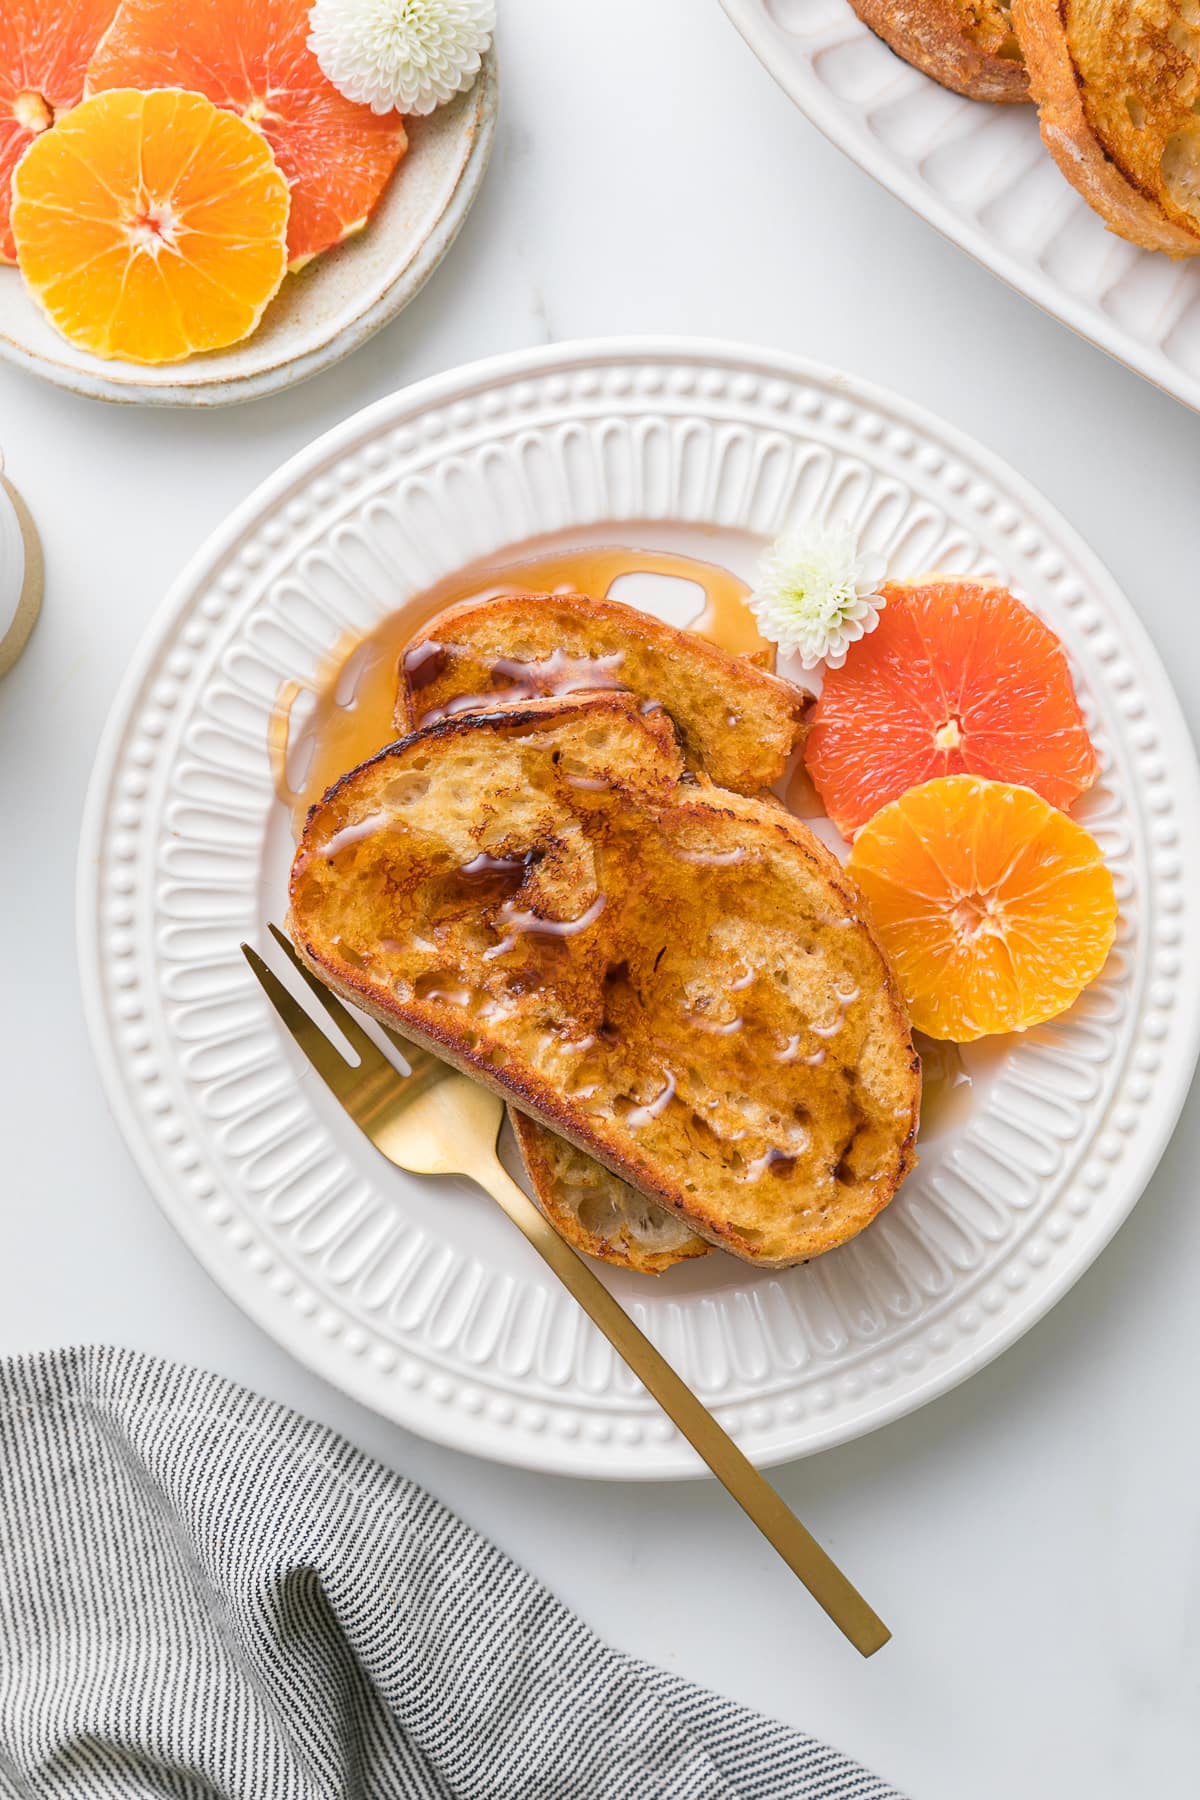 top down view of plated vegan orange french toast with maple syrup being poured over top.